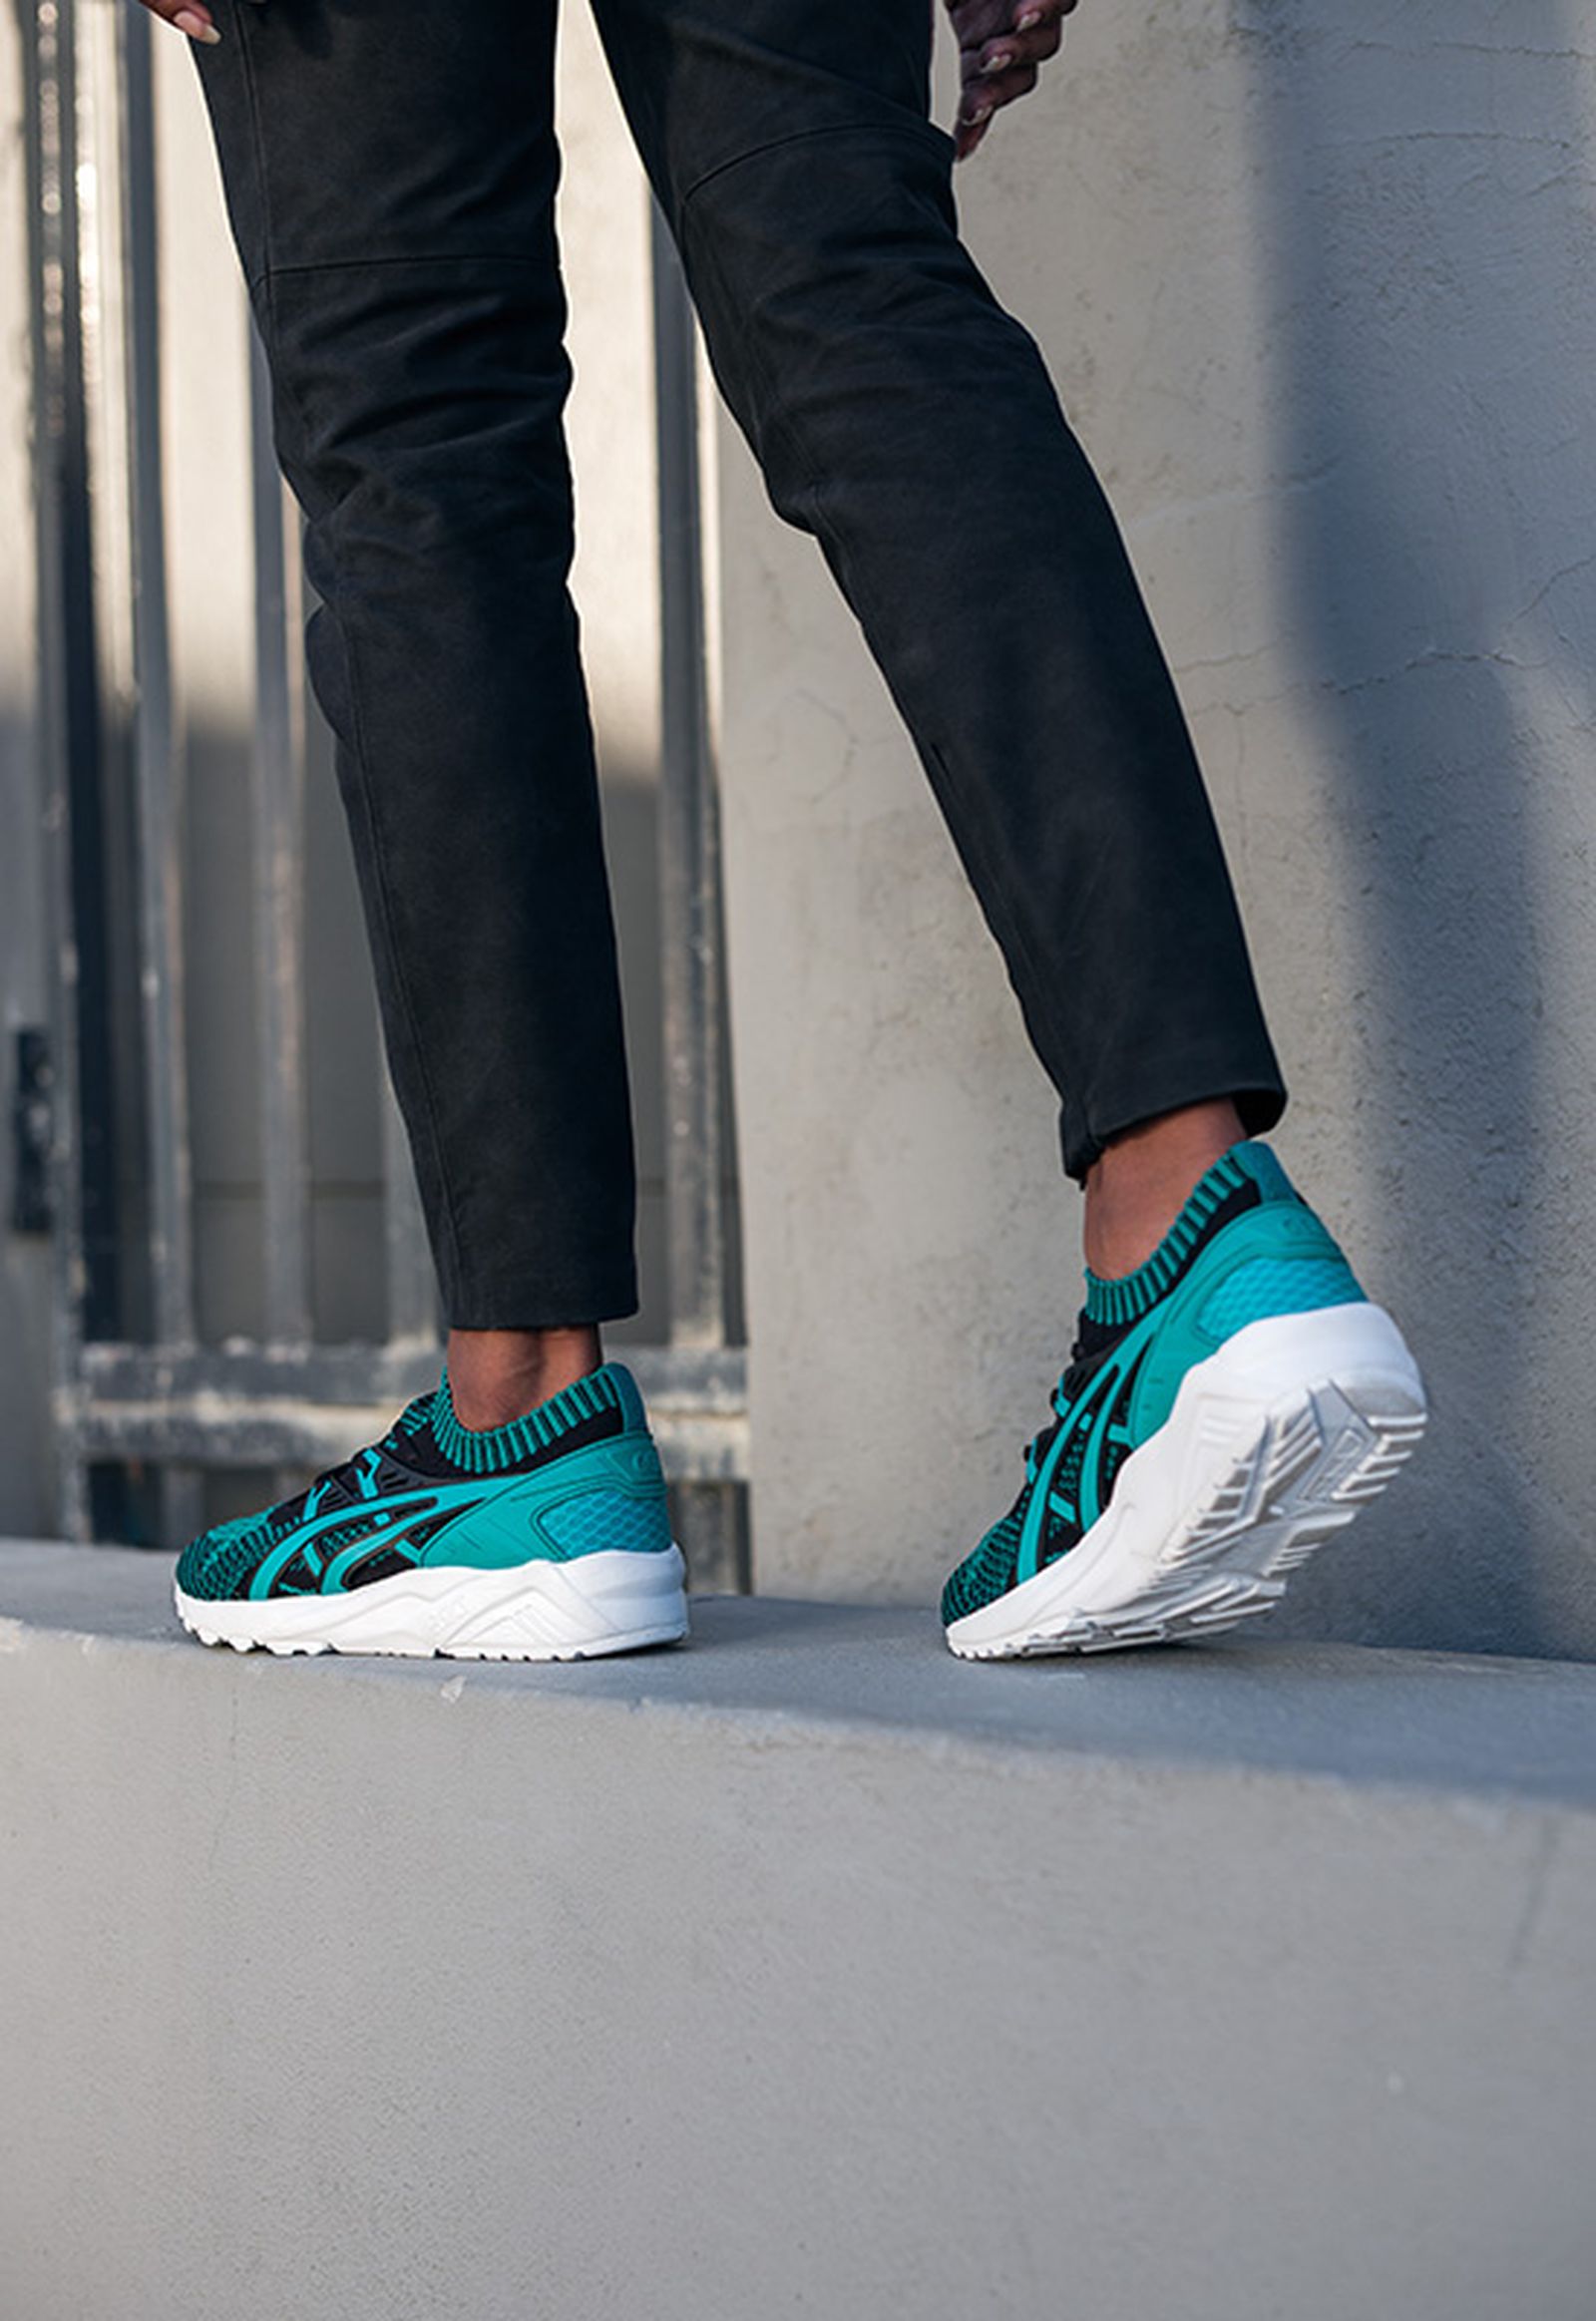 asics-tiger-gel-kayano-trainer-knit-colors-07